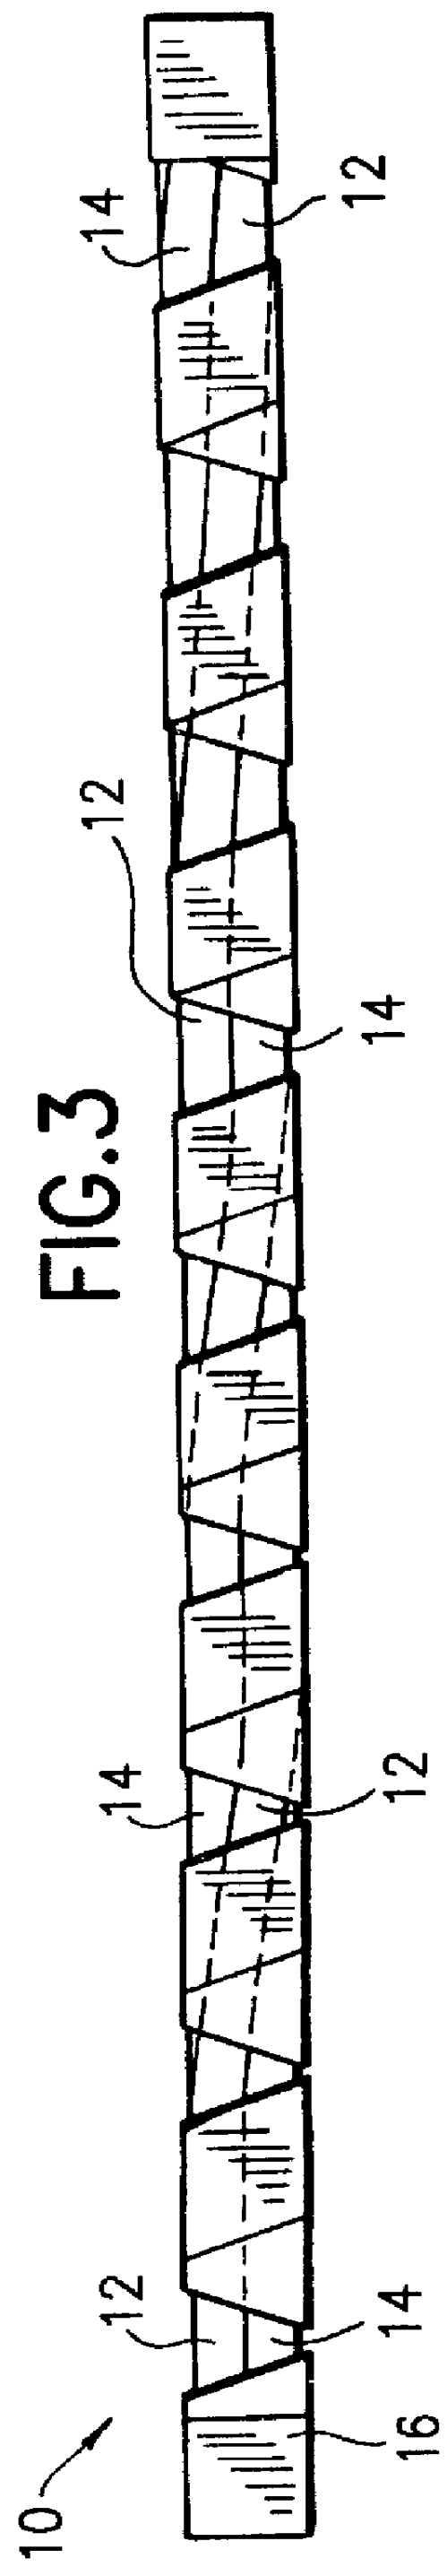 Multiple parallel conductor featuring conductors partially wrapped with an aramid or other suitable wrapping material